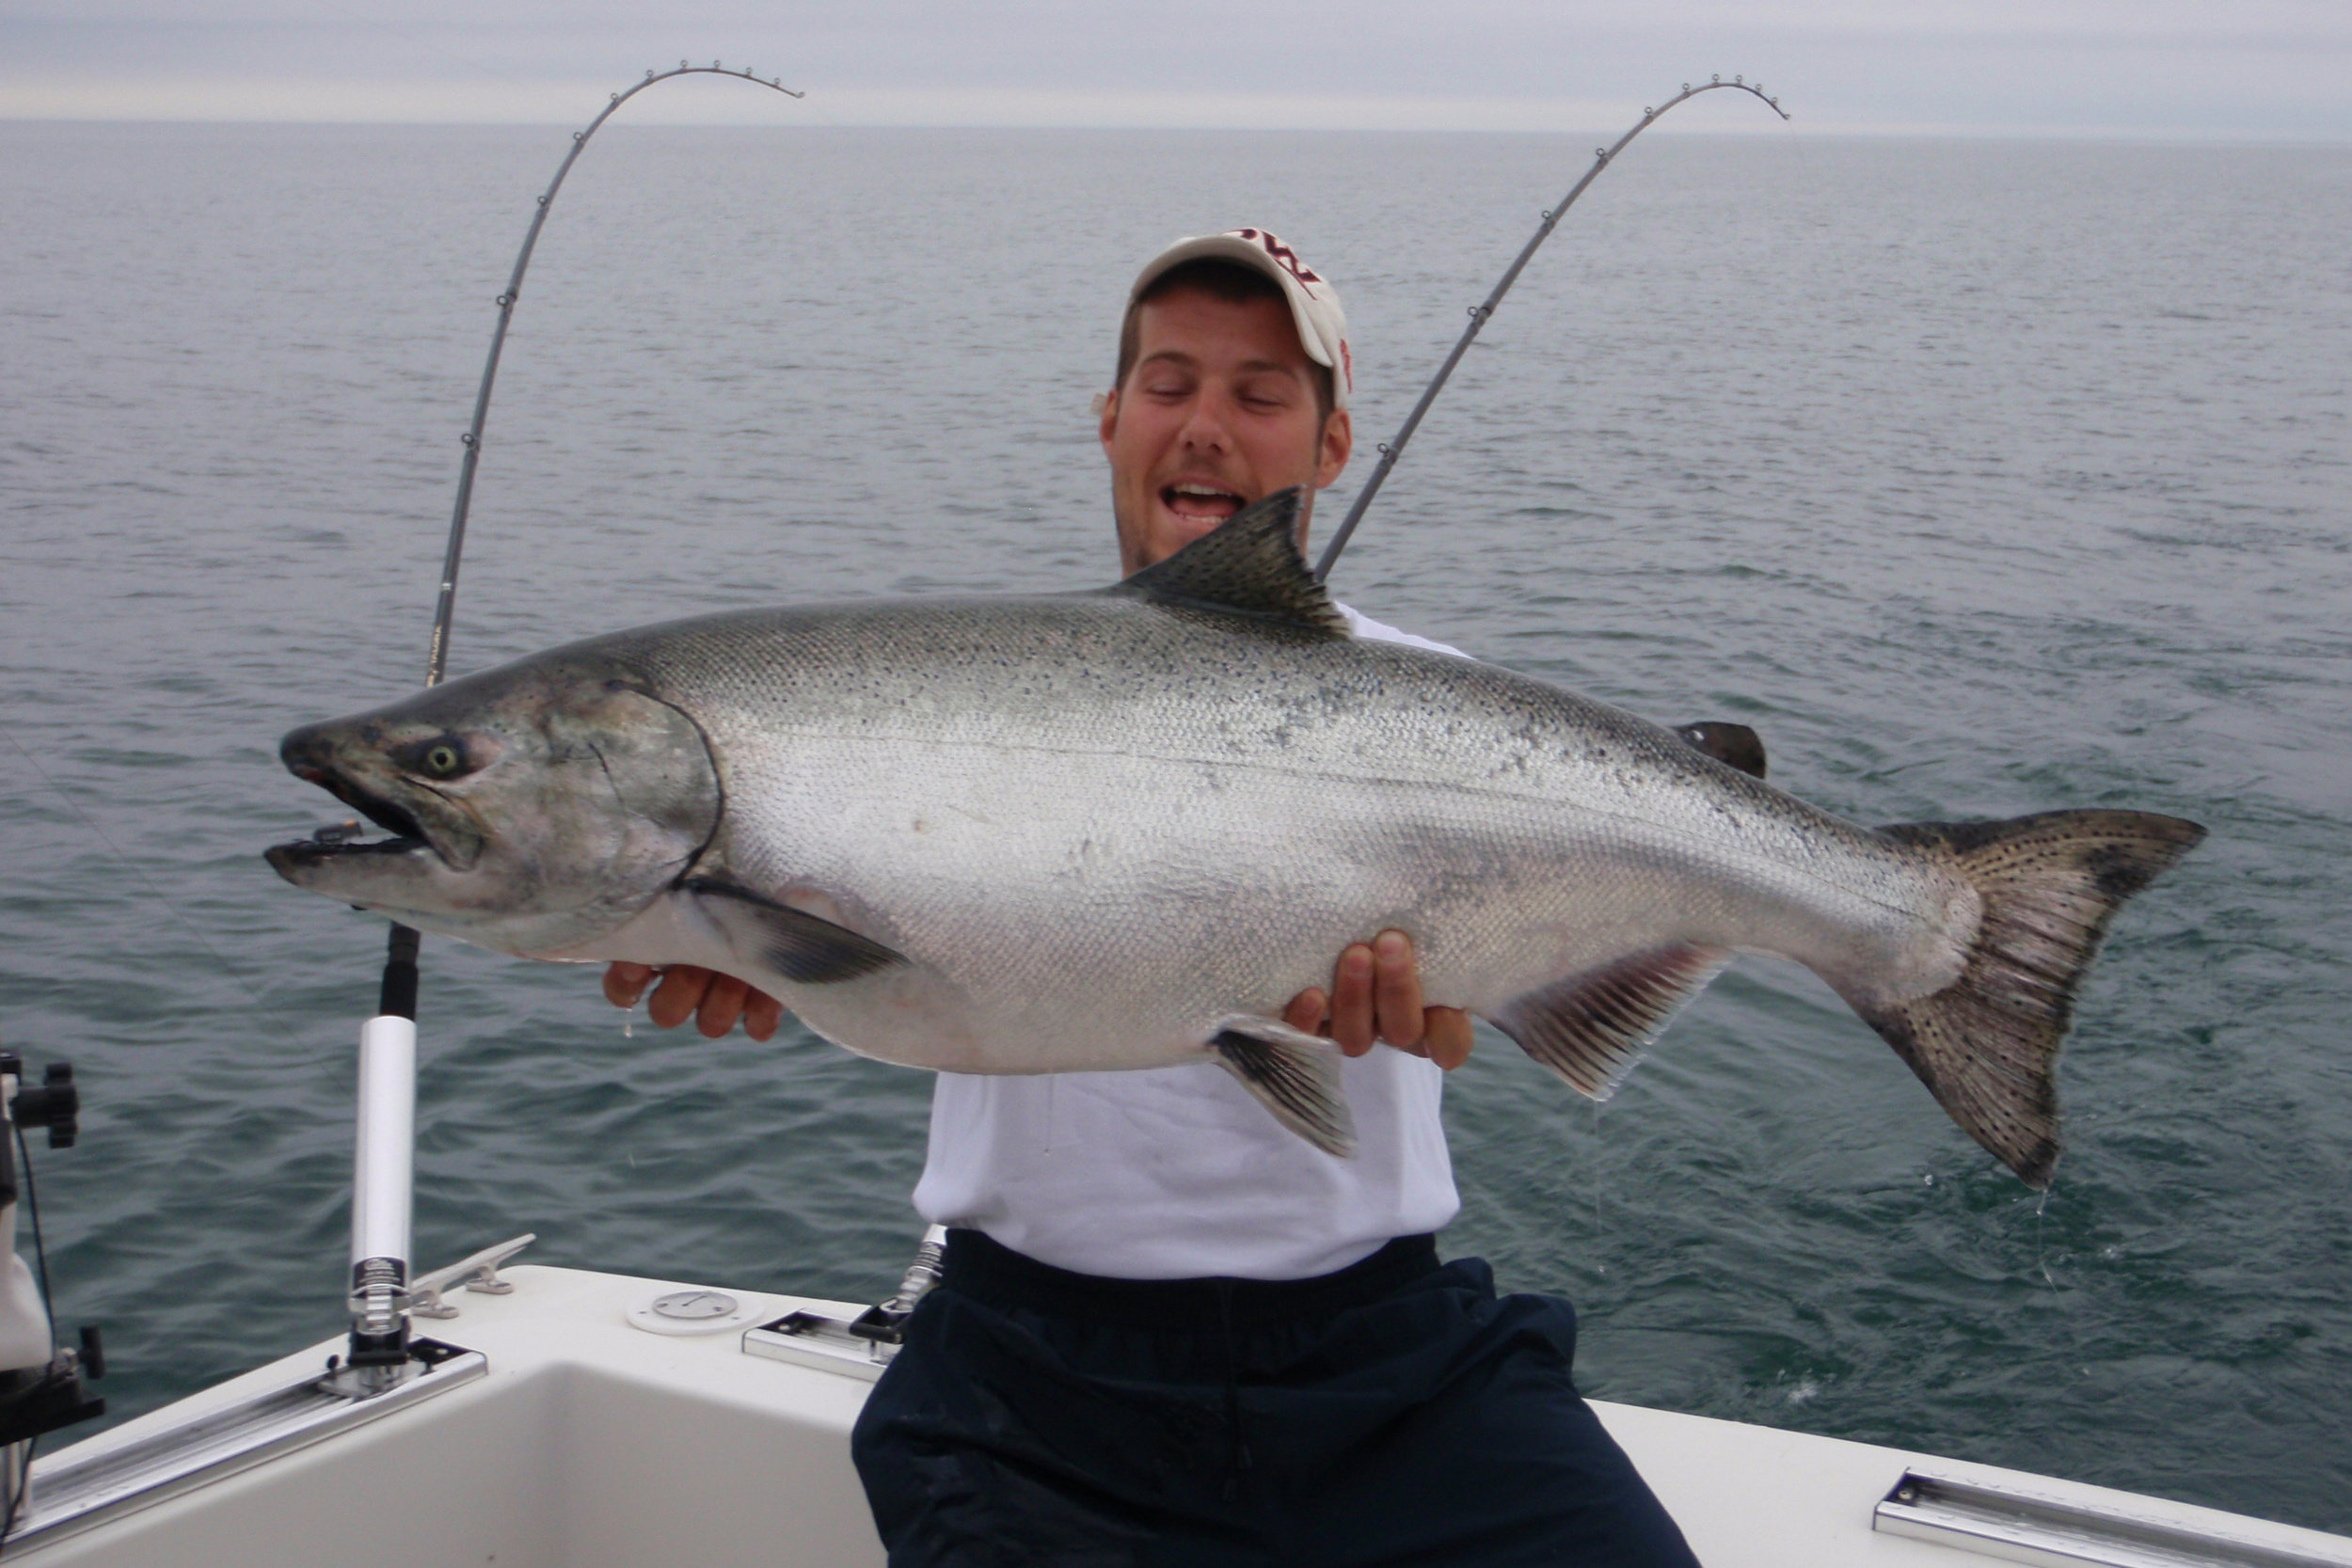   Let's get you HOOKED-UP!   Call Slammin' Salmon today 416-841-2323 